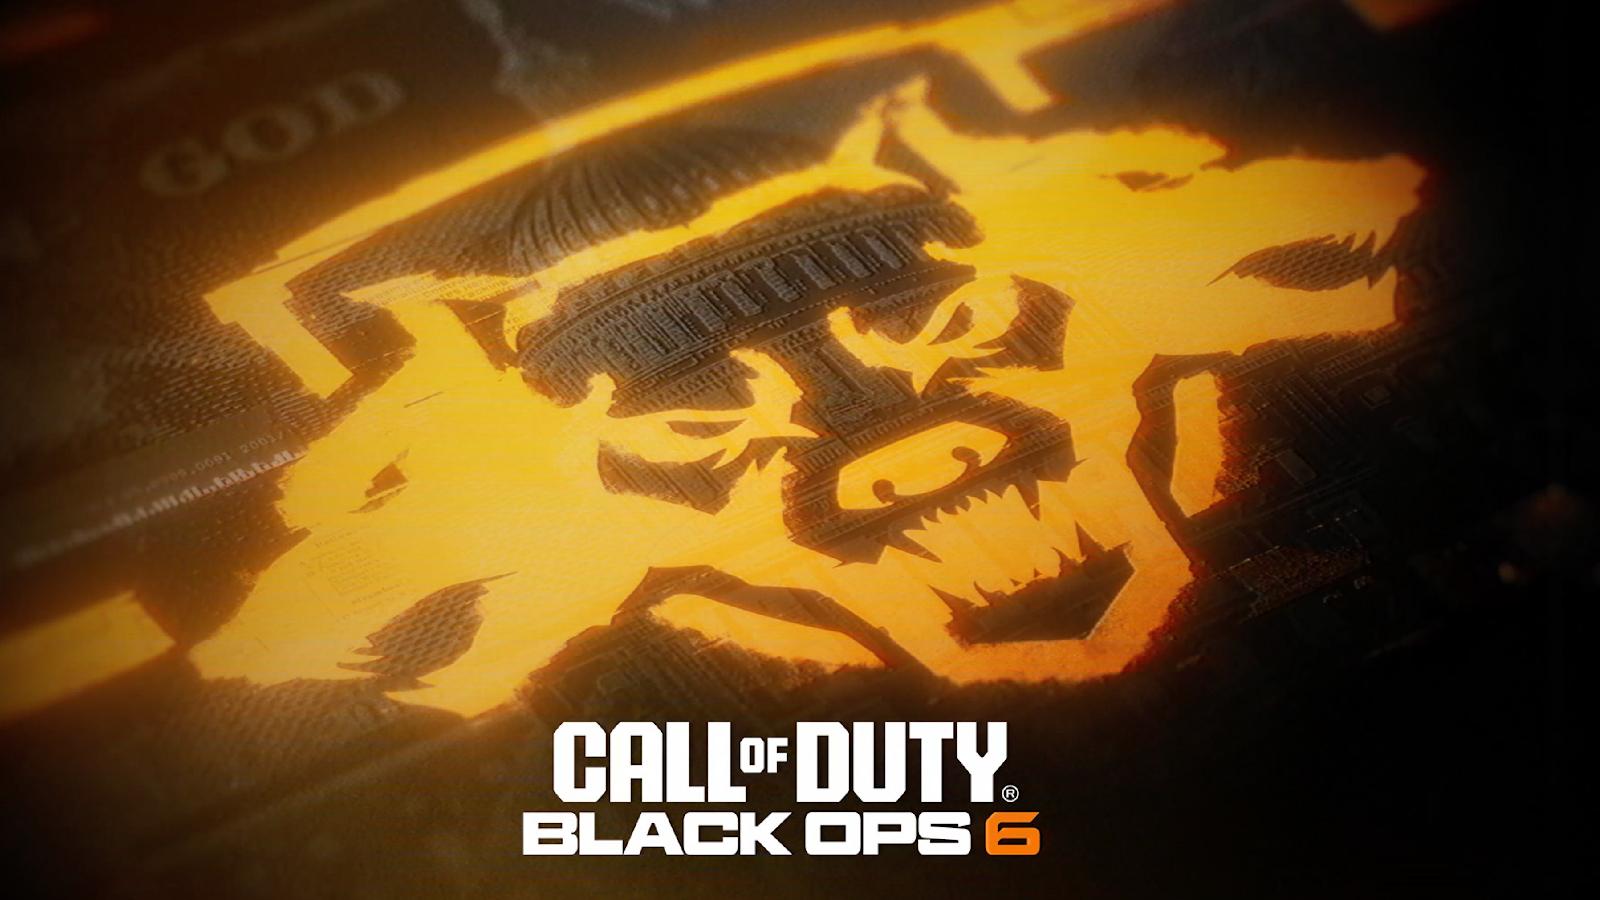 Call of Duty Black Ops 6 logo and key art